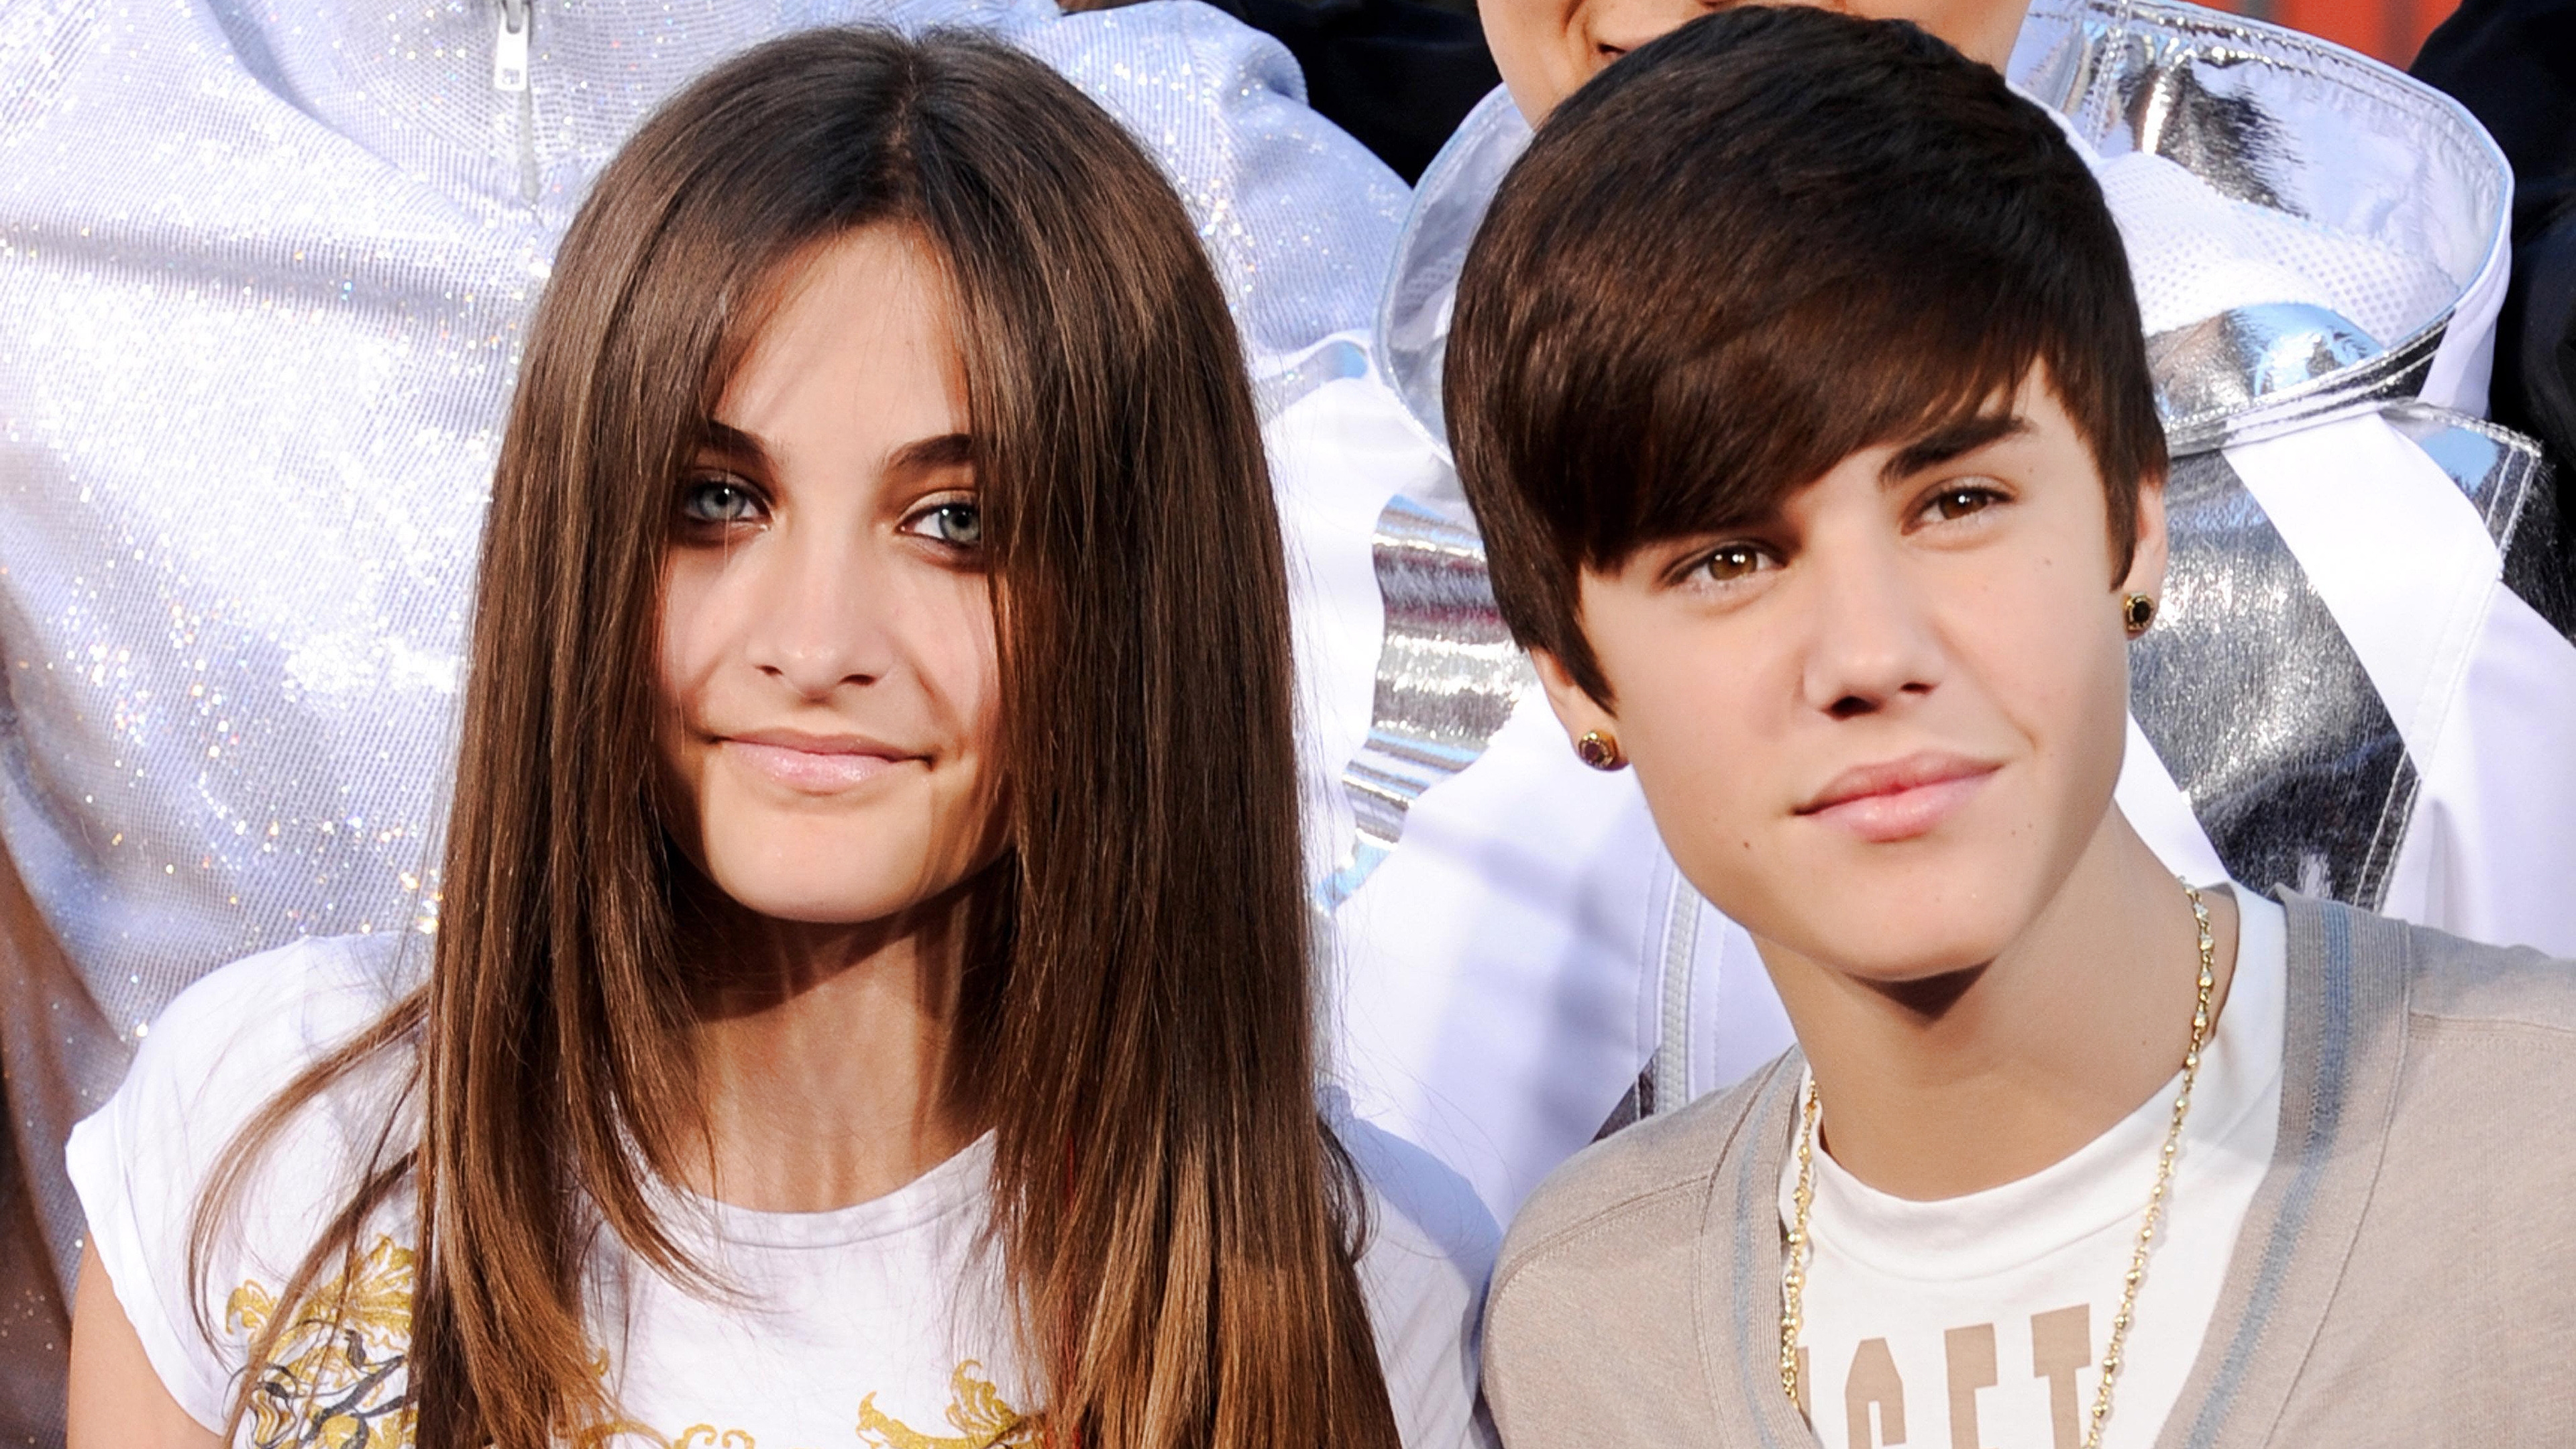 Paris Jackson and Justin Bieber for 3840 x 2160 Ultra HD resolution